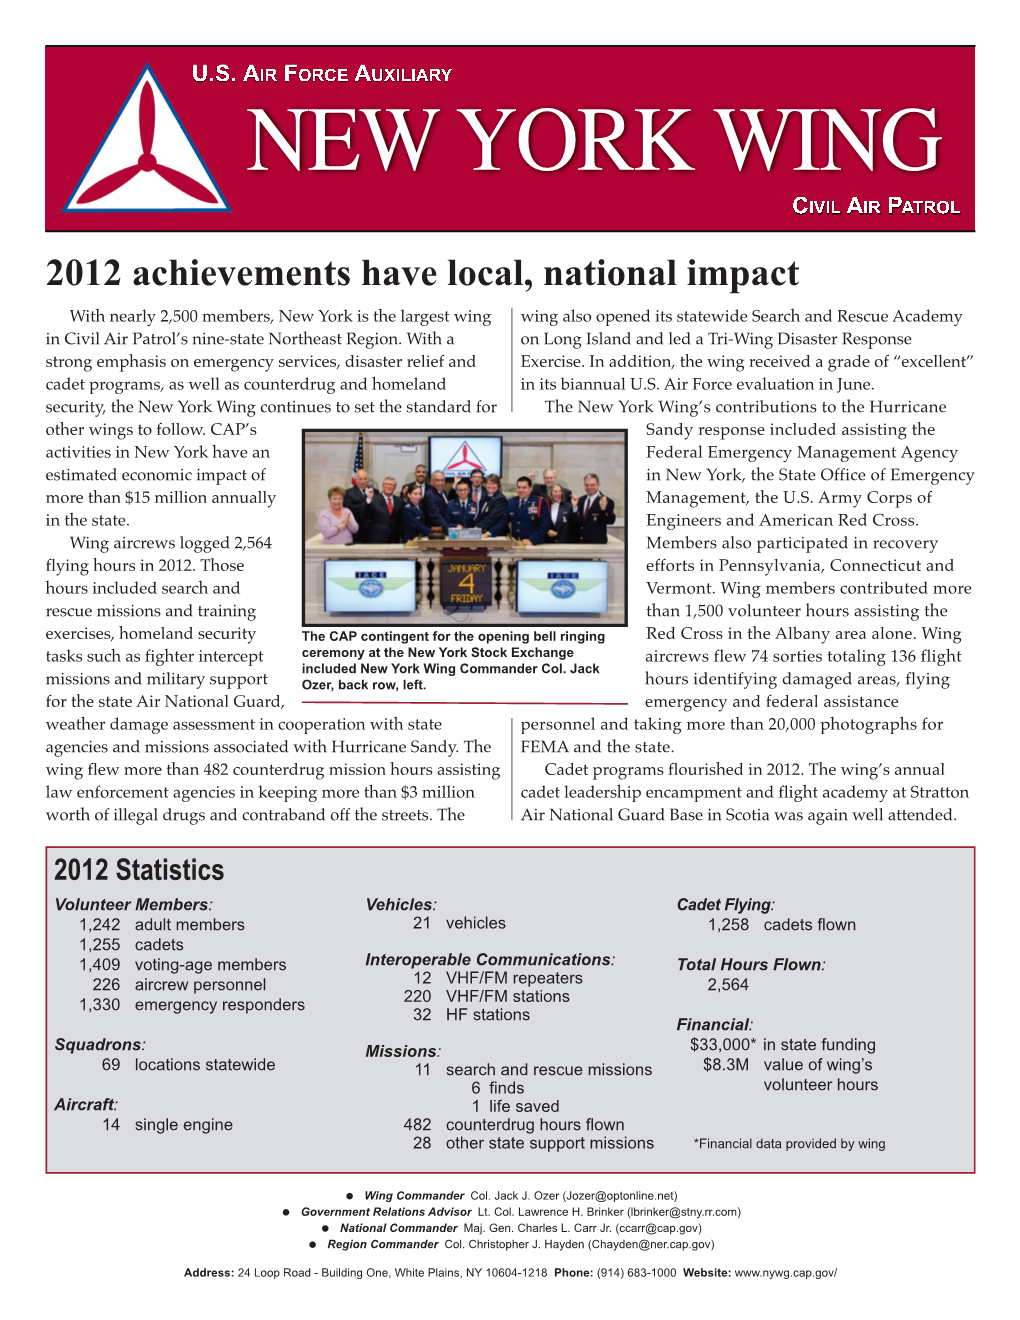 NEW YORK WING CIVIL AIR PATROL 2012 Achievements Have Local, National Impact